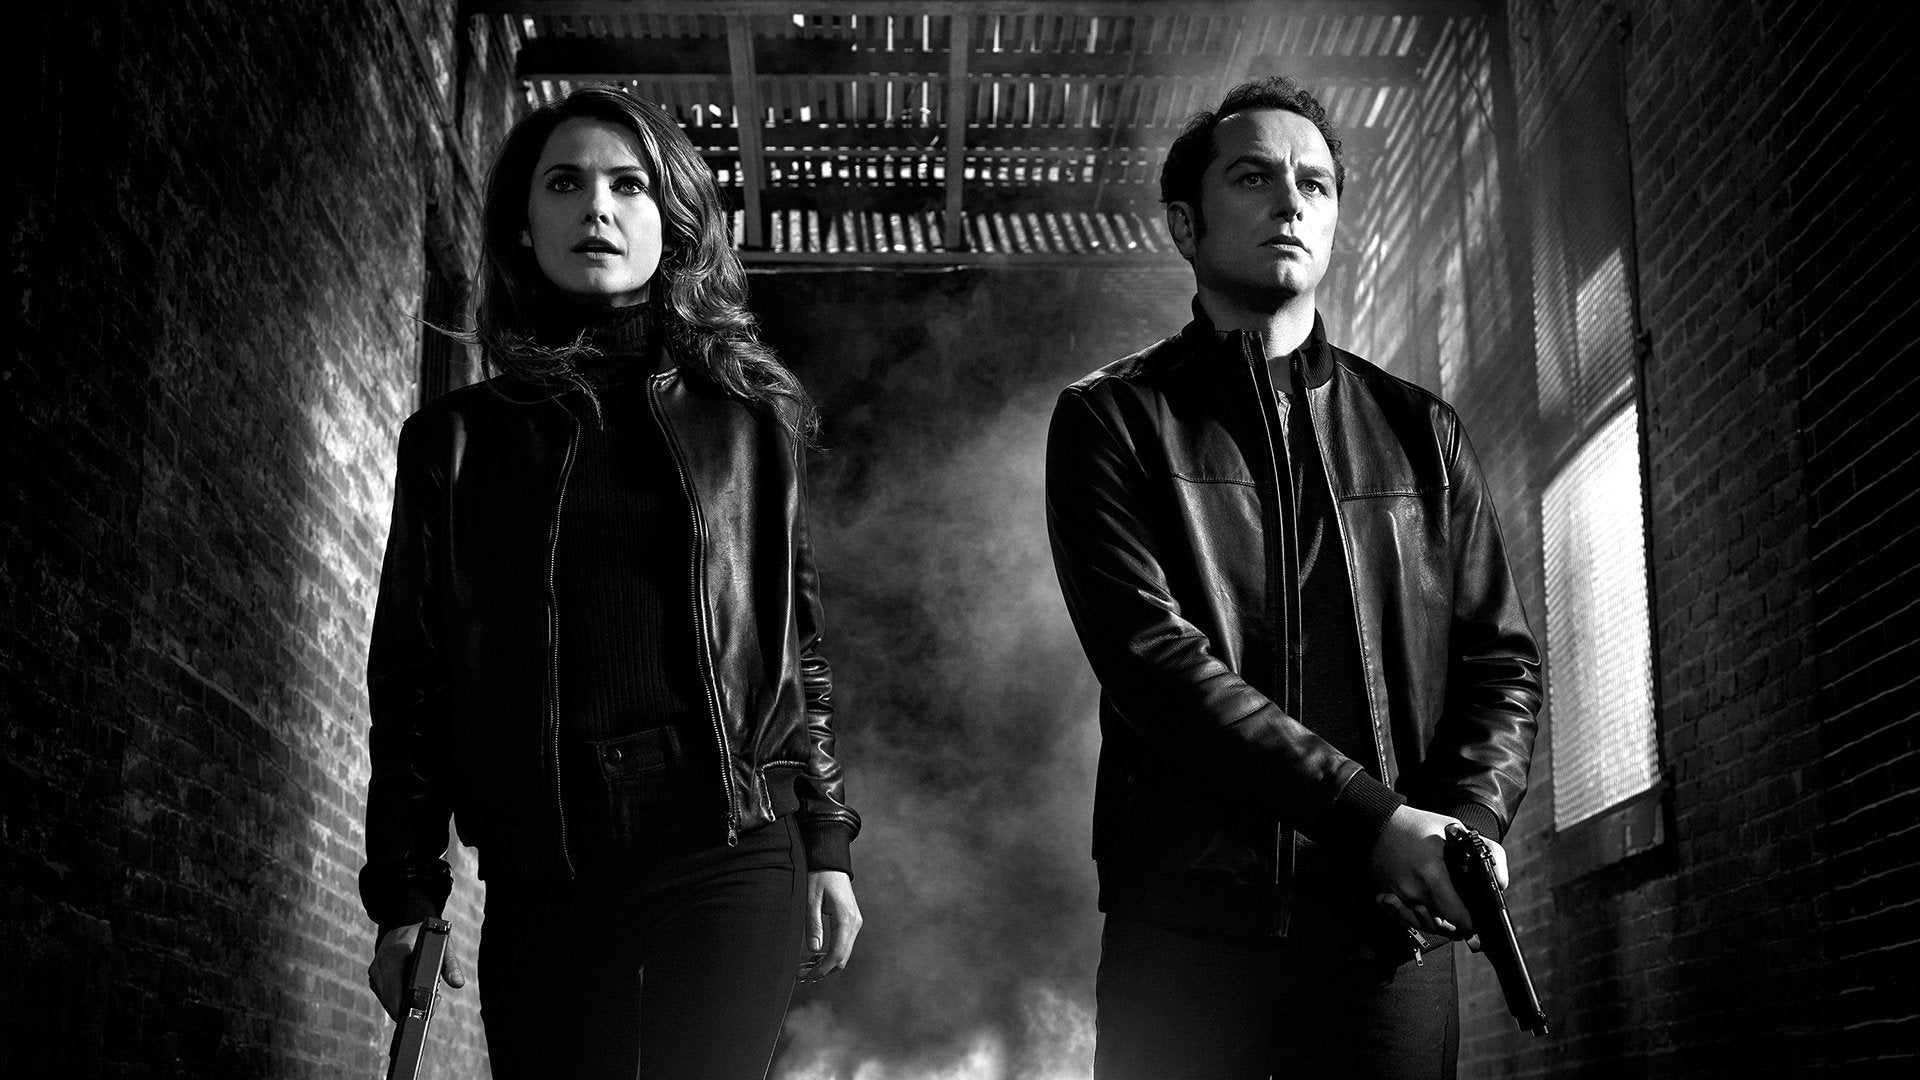 The Americans: The Complete Series - Seasons 1-6